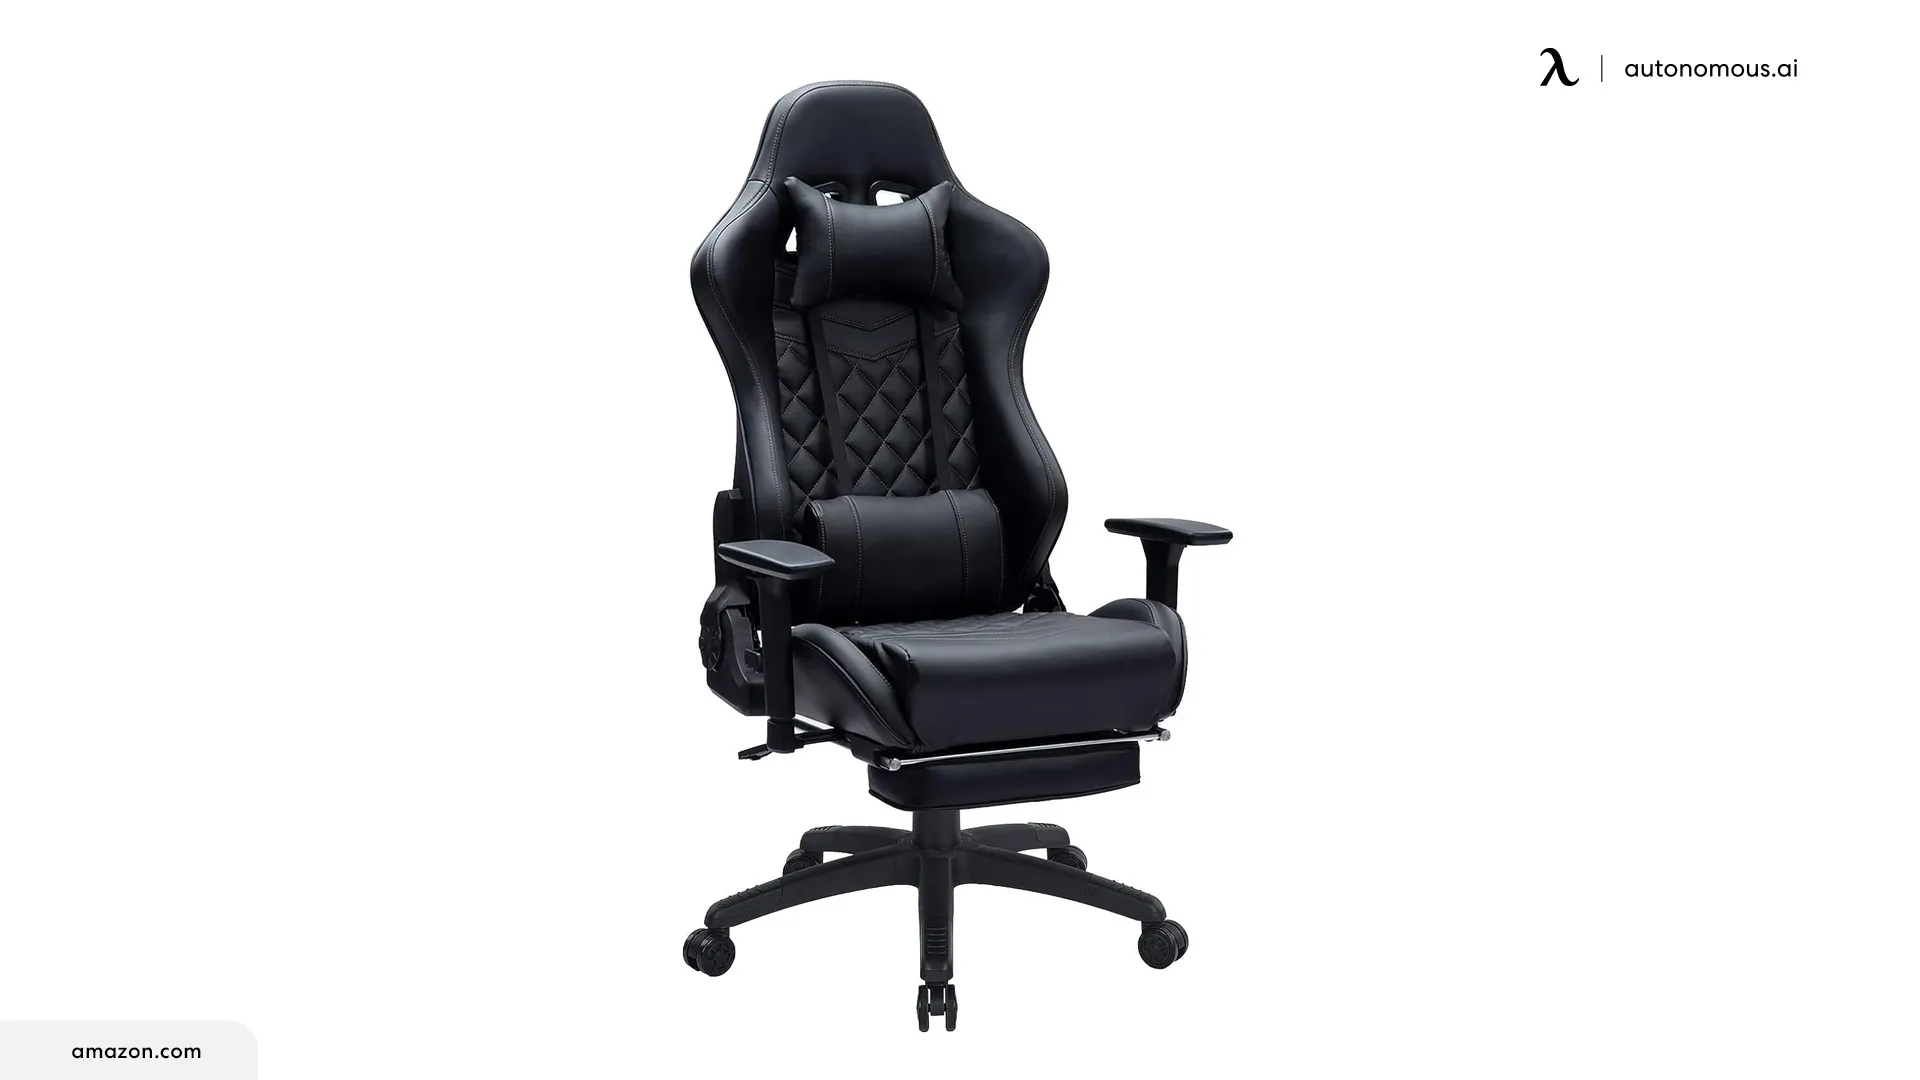 Blue Whale Heavy Duty Gaming Chair